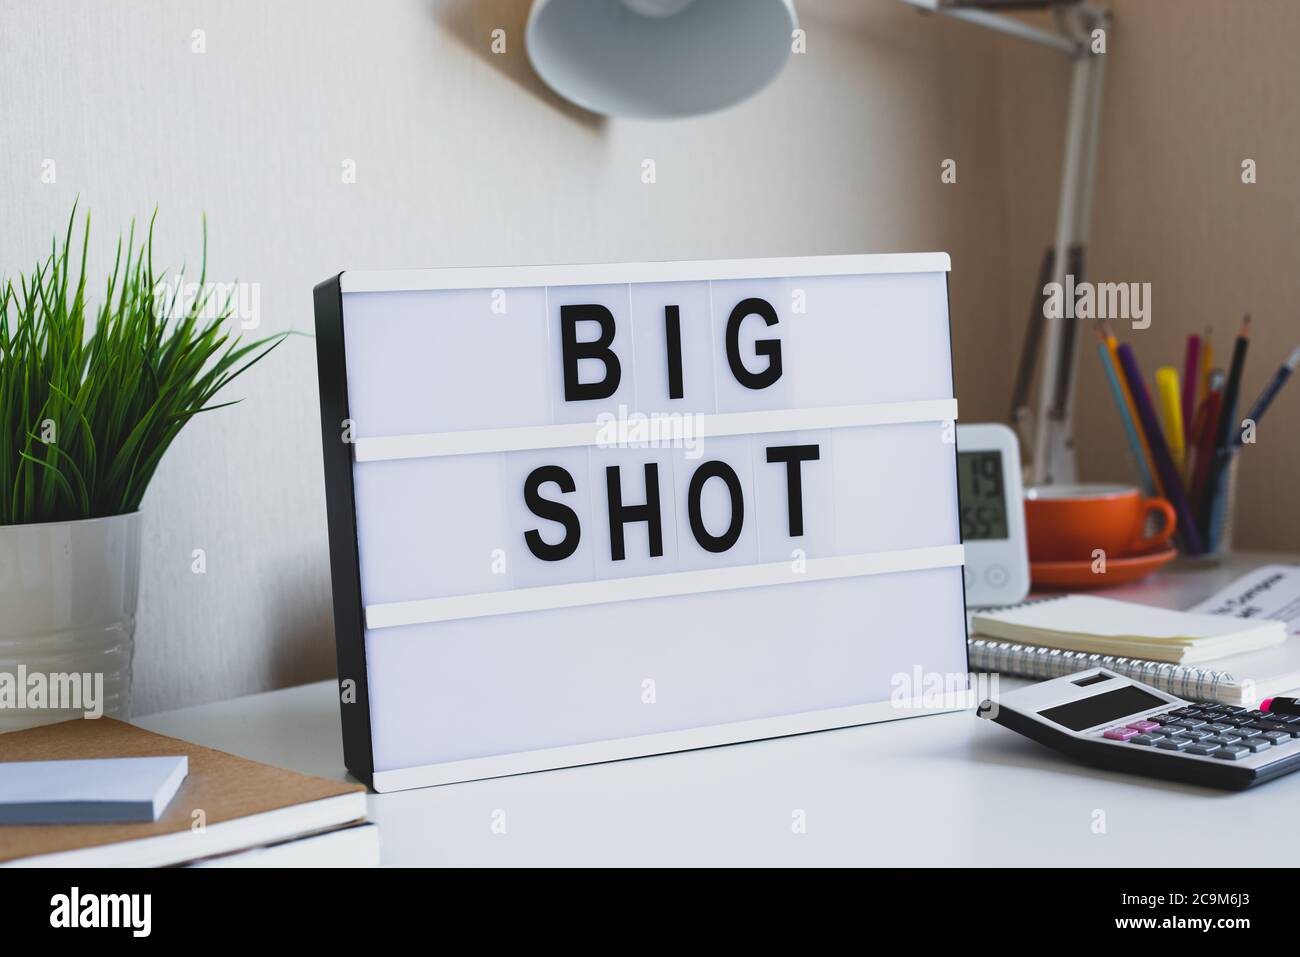 Big shot text on light box.investment profit with stock market.no people Stock Photo